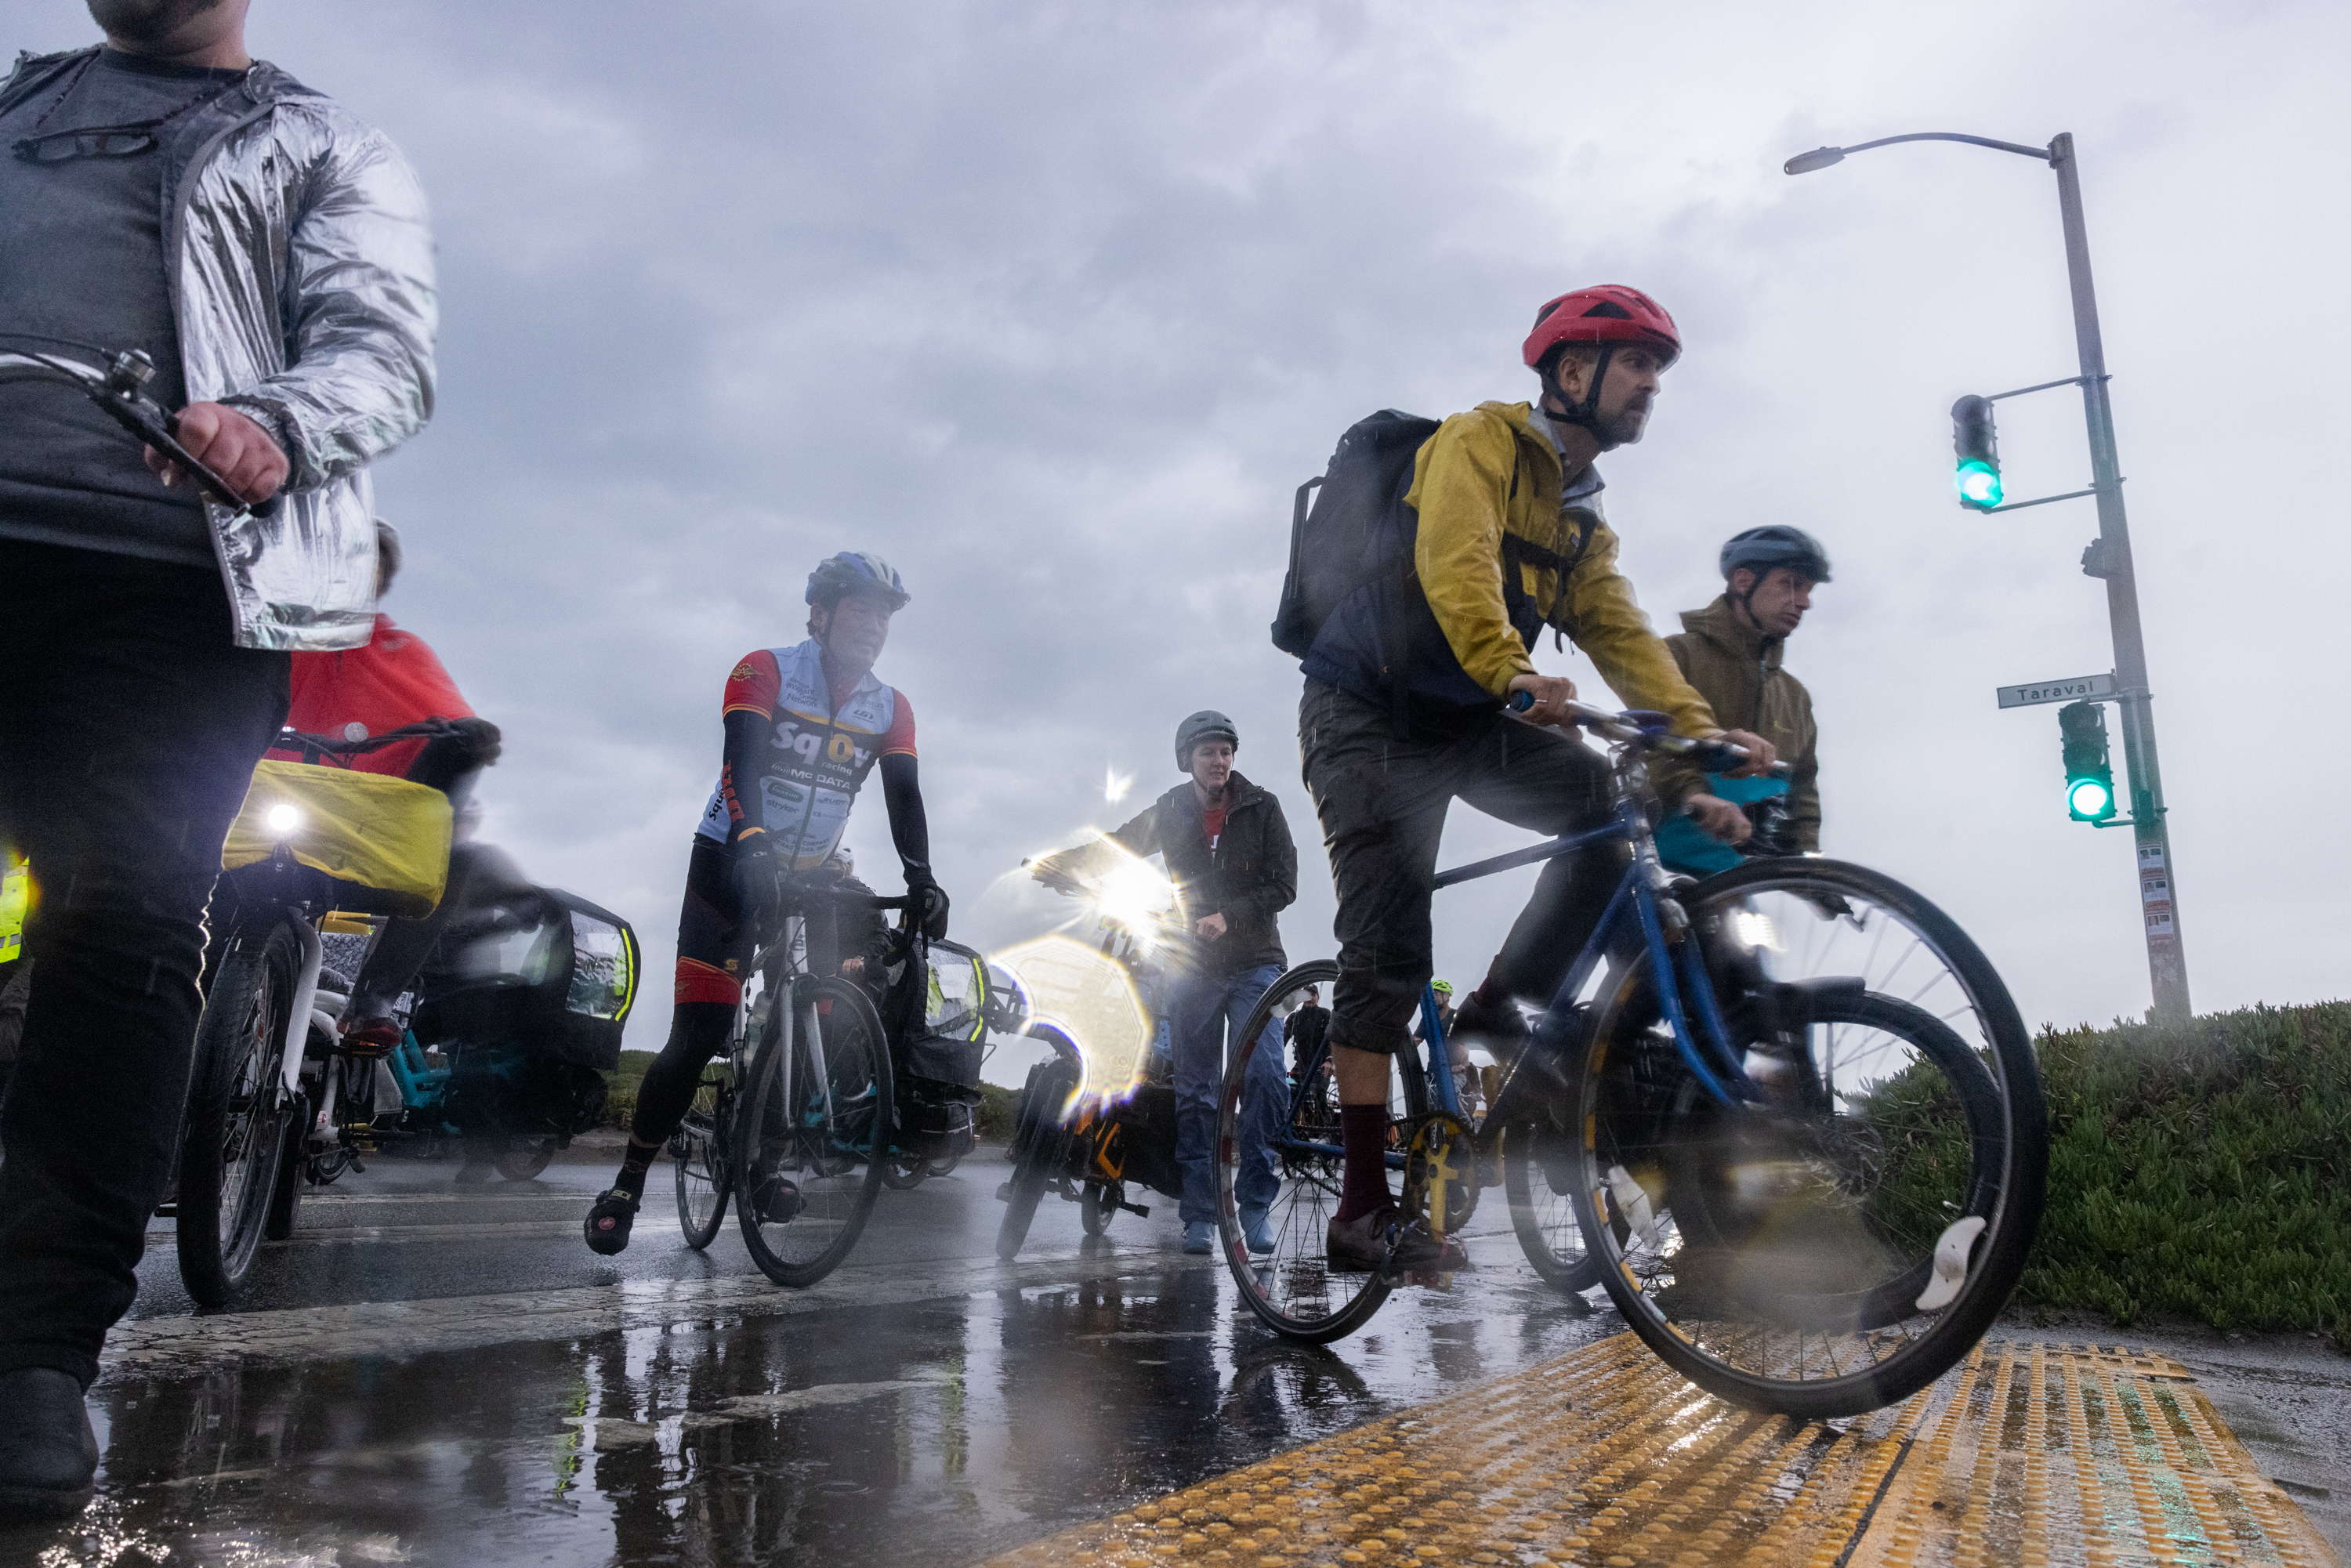 People bike through the Great Highway in the rain.